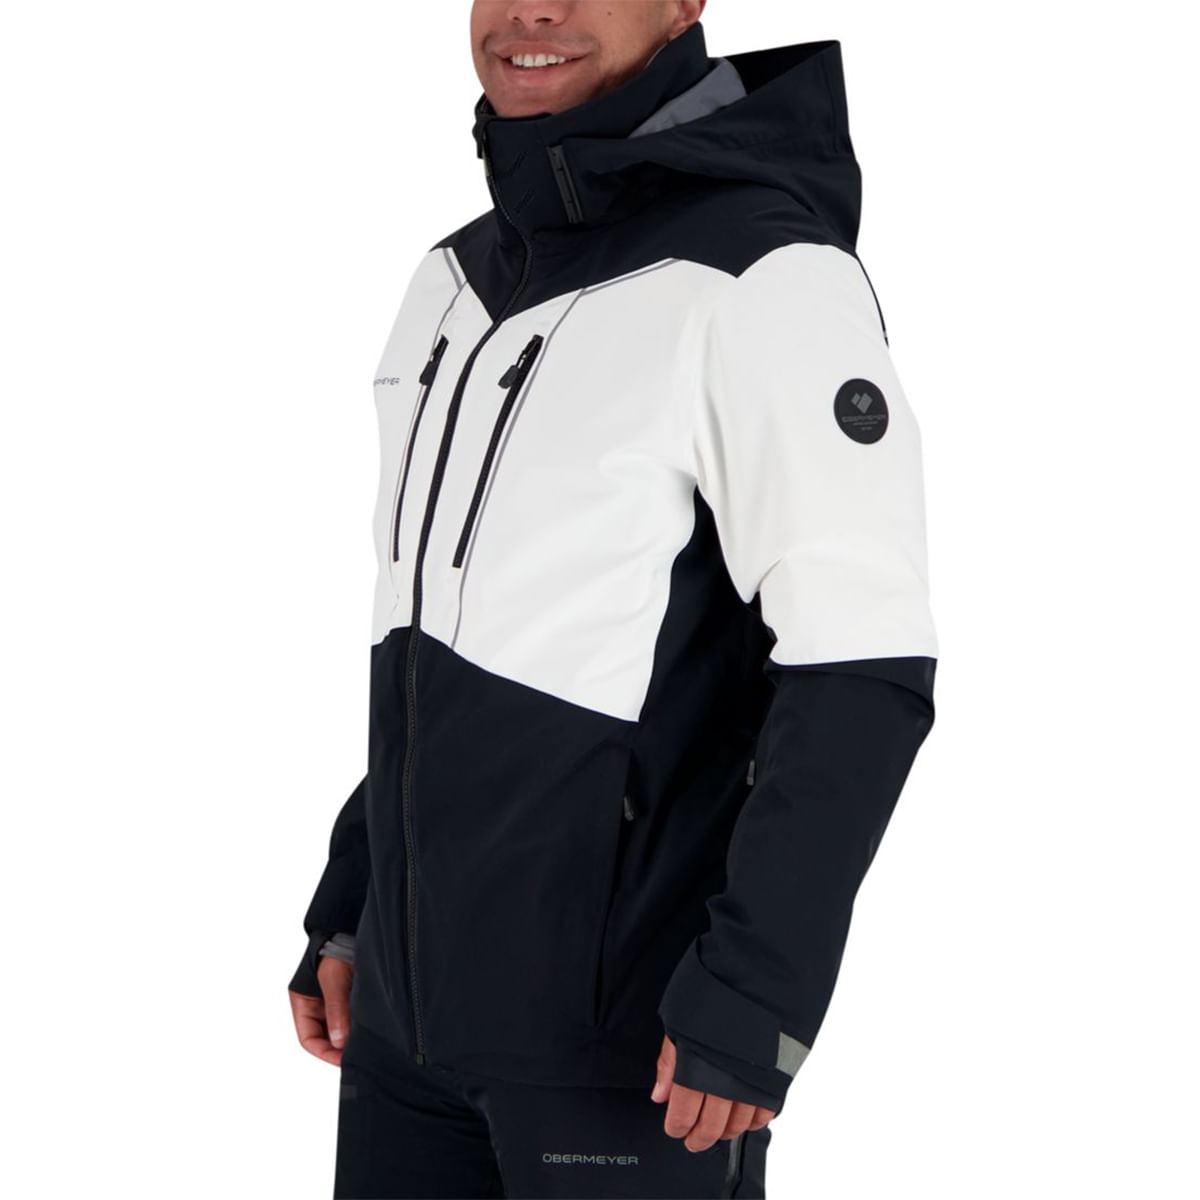 Obermeyer Mens IBA DOWN HYBRID JACKET BLACK - Ski Jackets and Gear, Winter  Coats, Running, Tennis, Soccer, and more from Top Brands - Paragon Sports